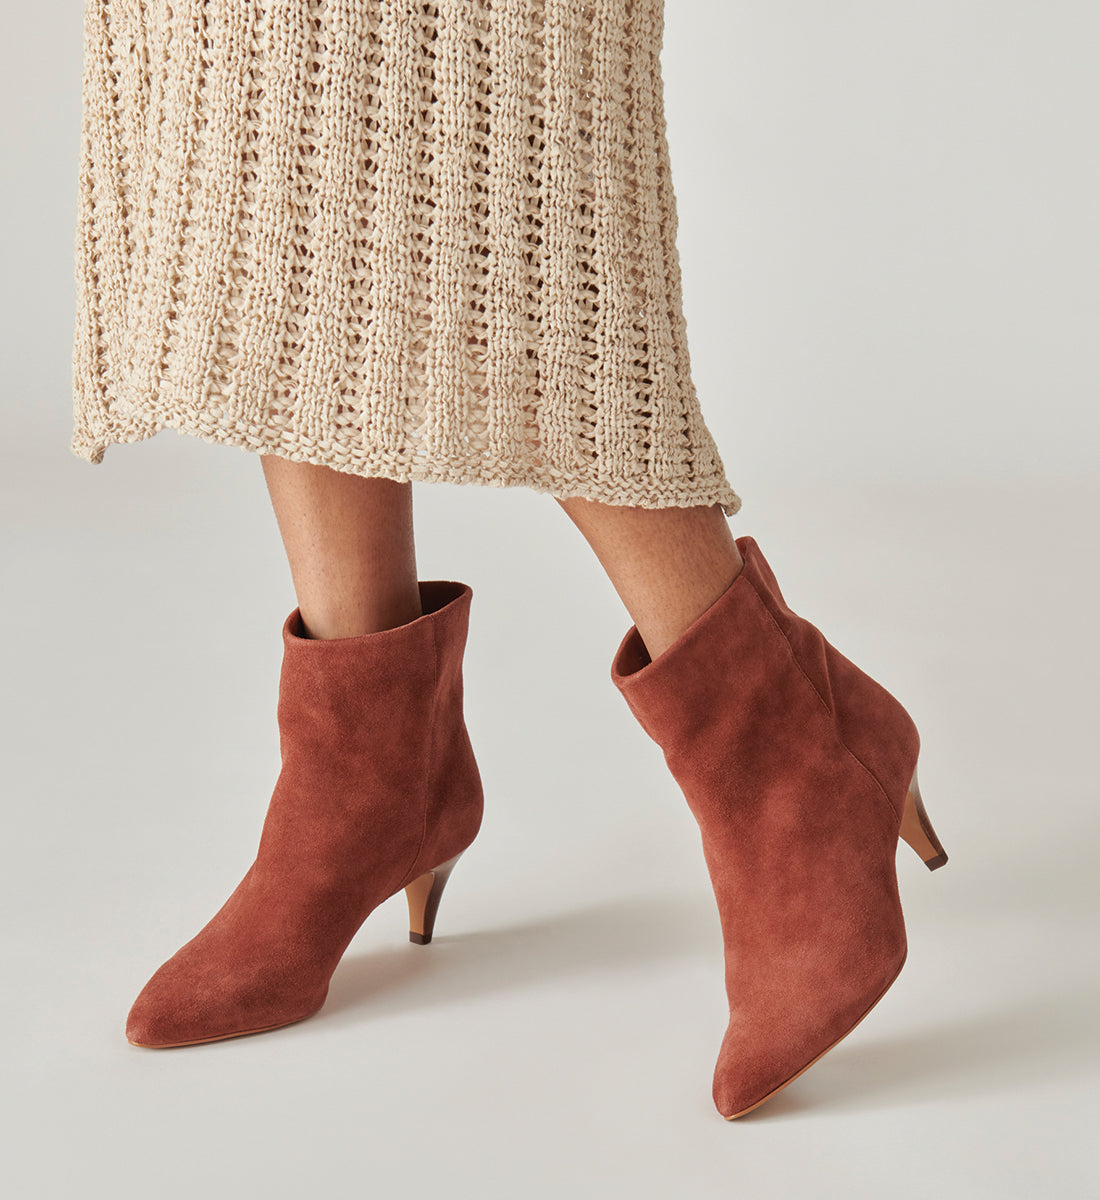 15 Fabulous Boots We're Coveting for Fall | Elle Canada